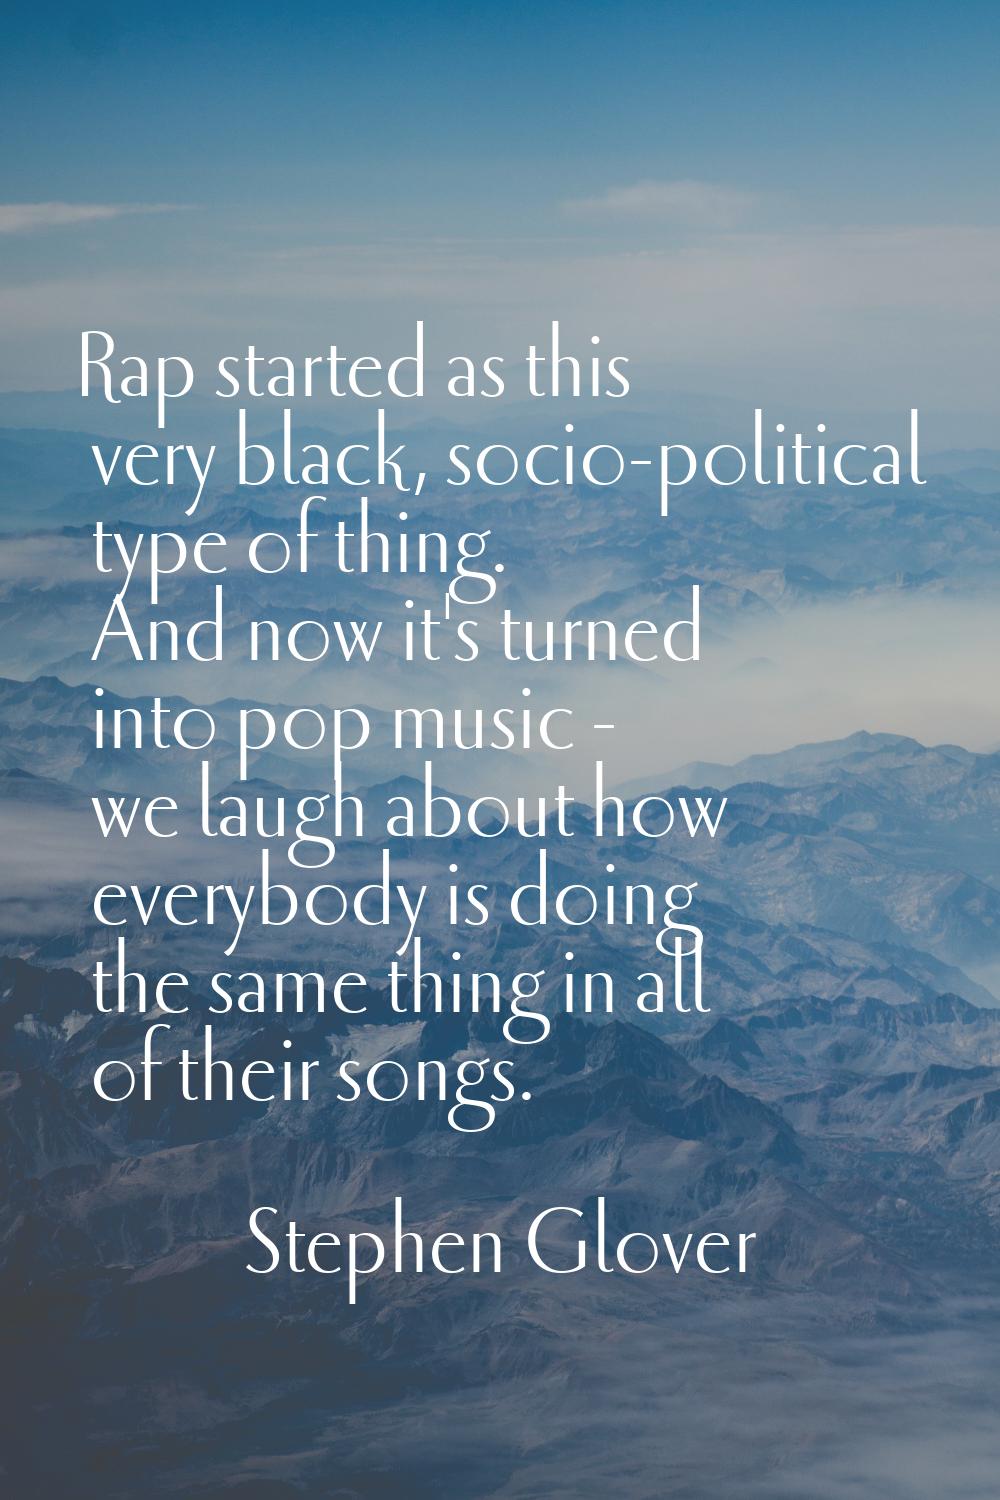 Rap started as this very black, socio-political type of thing. And now it's turned into pop music -